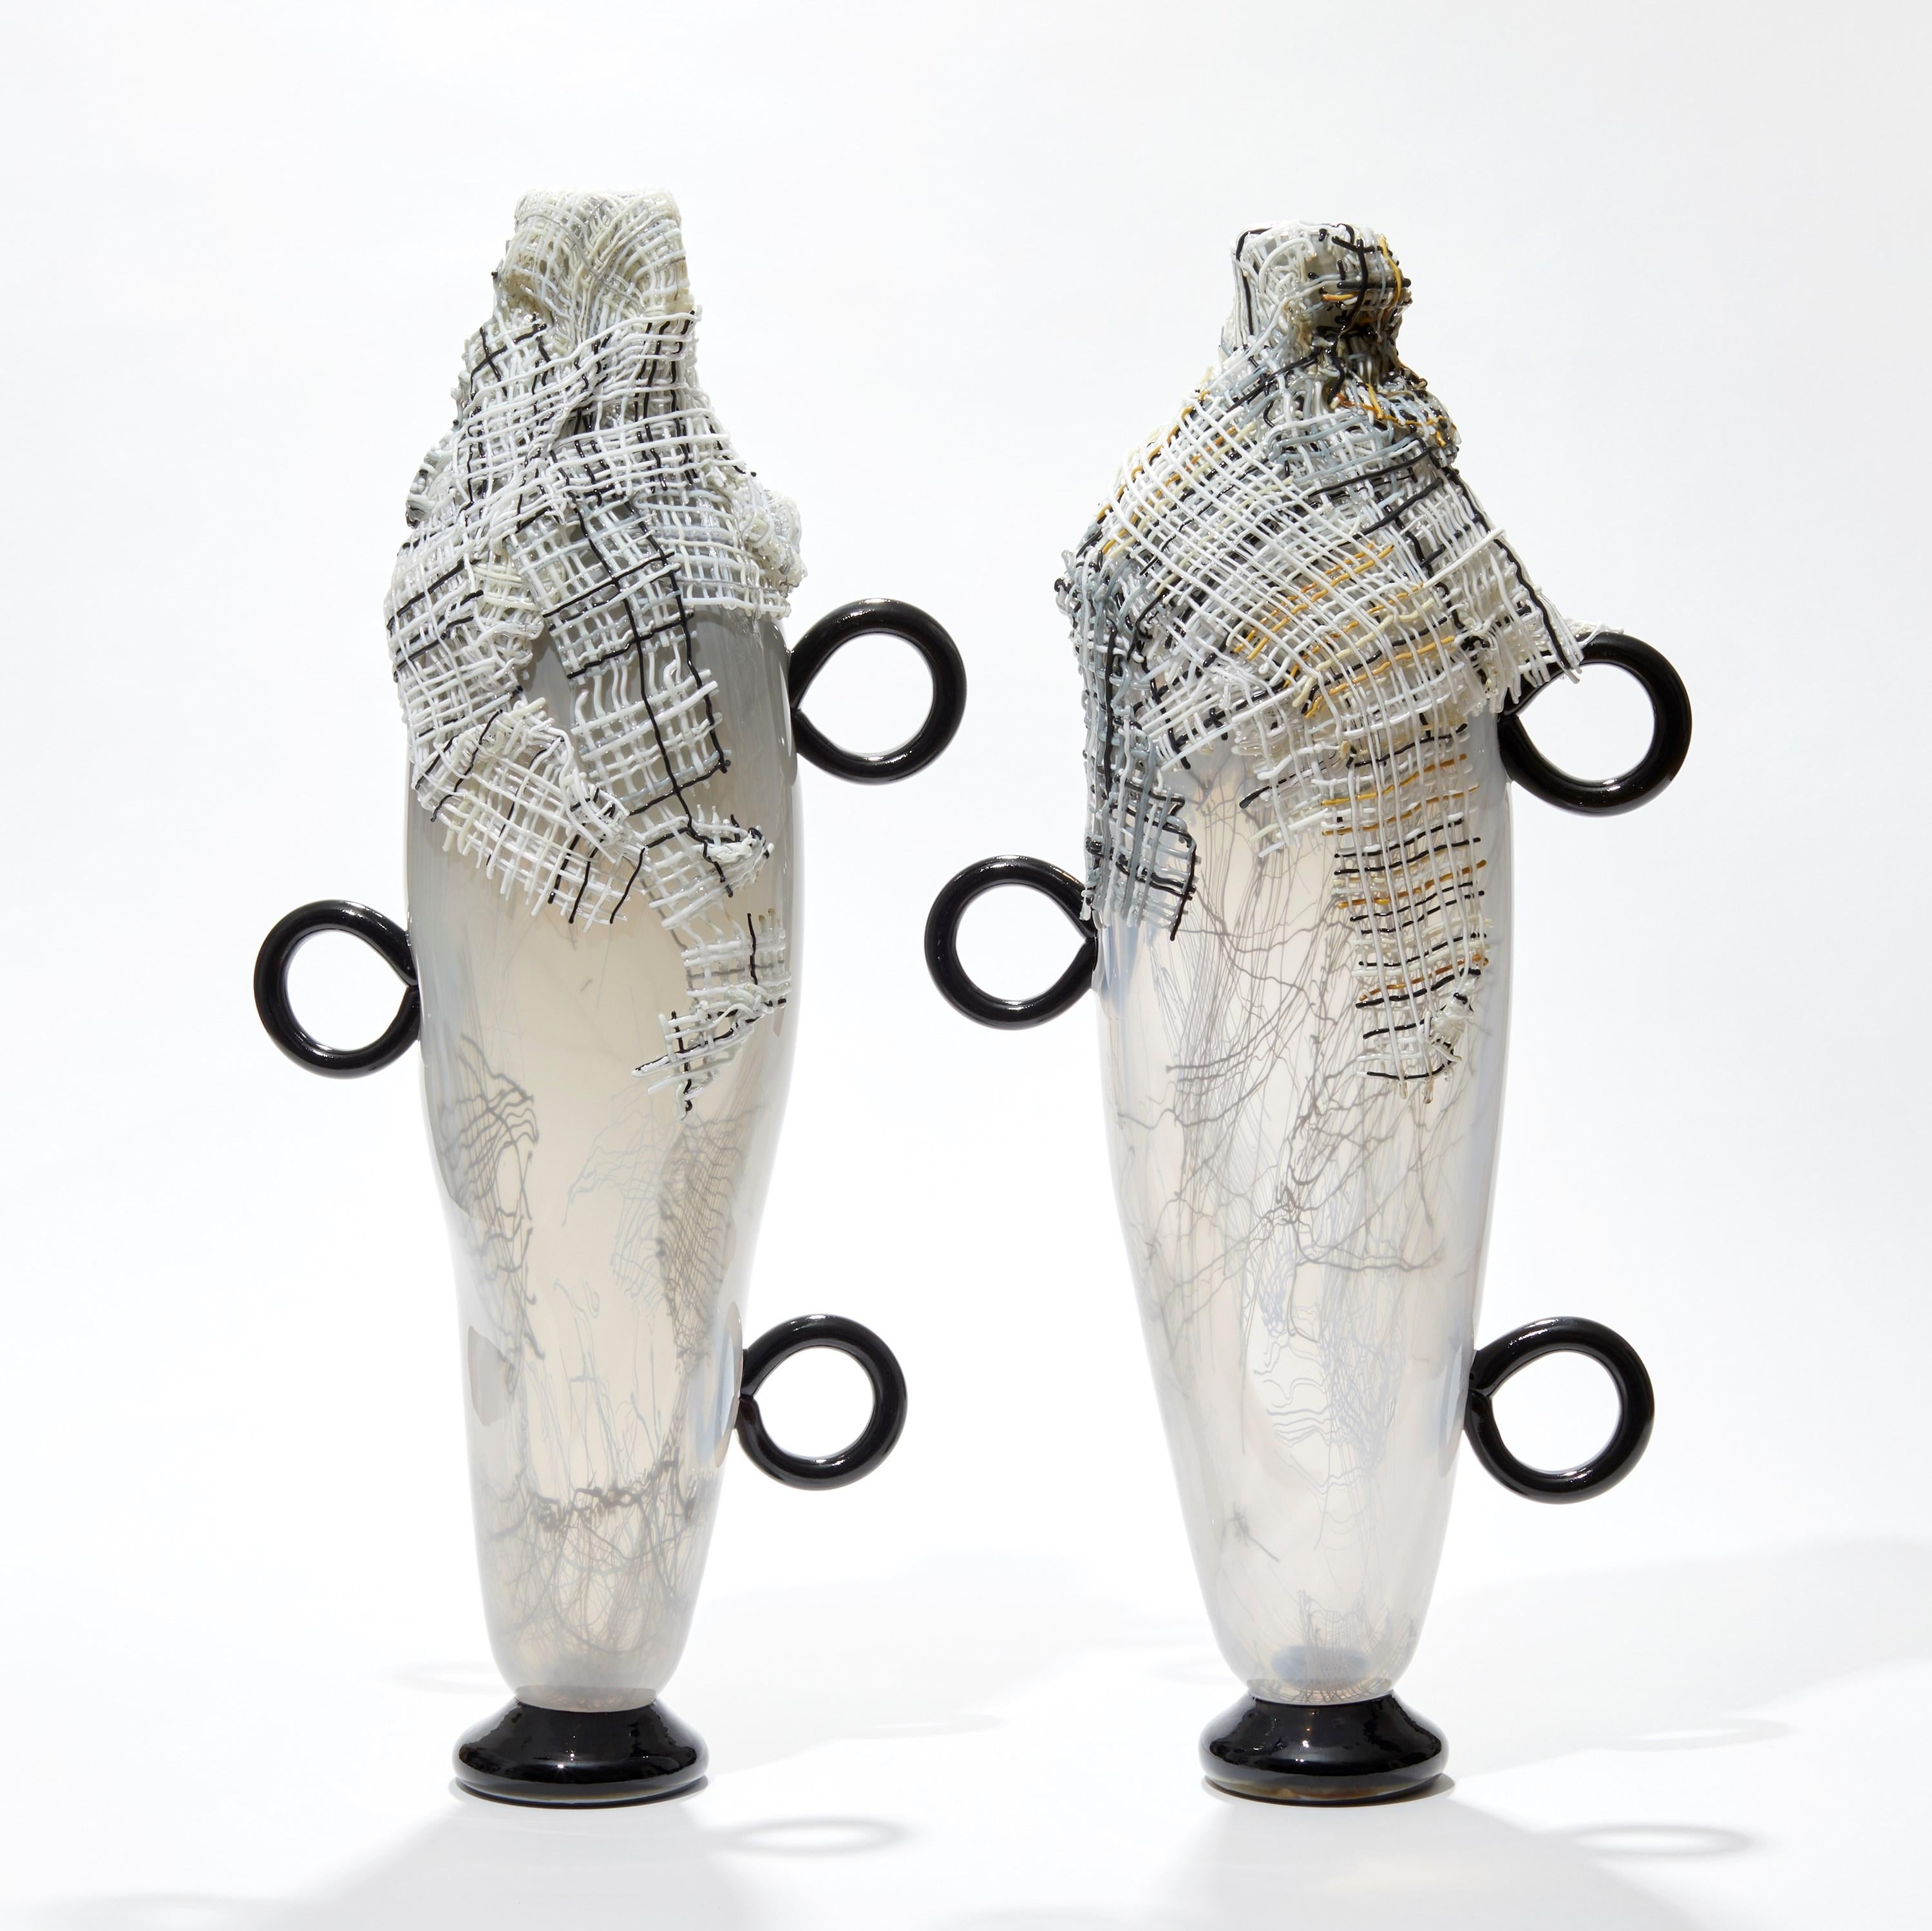 Glass Only Hope Remains II, a monochrome glass standing sculpture by Cathryn Shilling For Sale